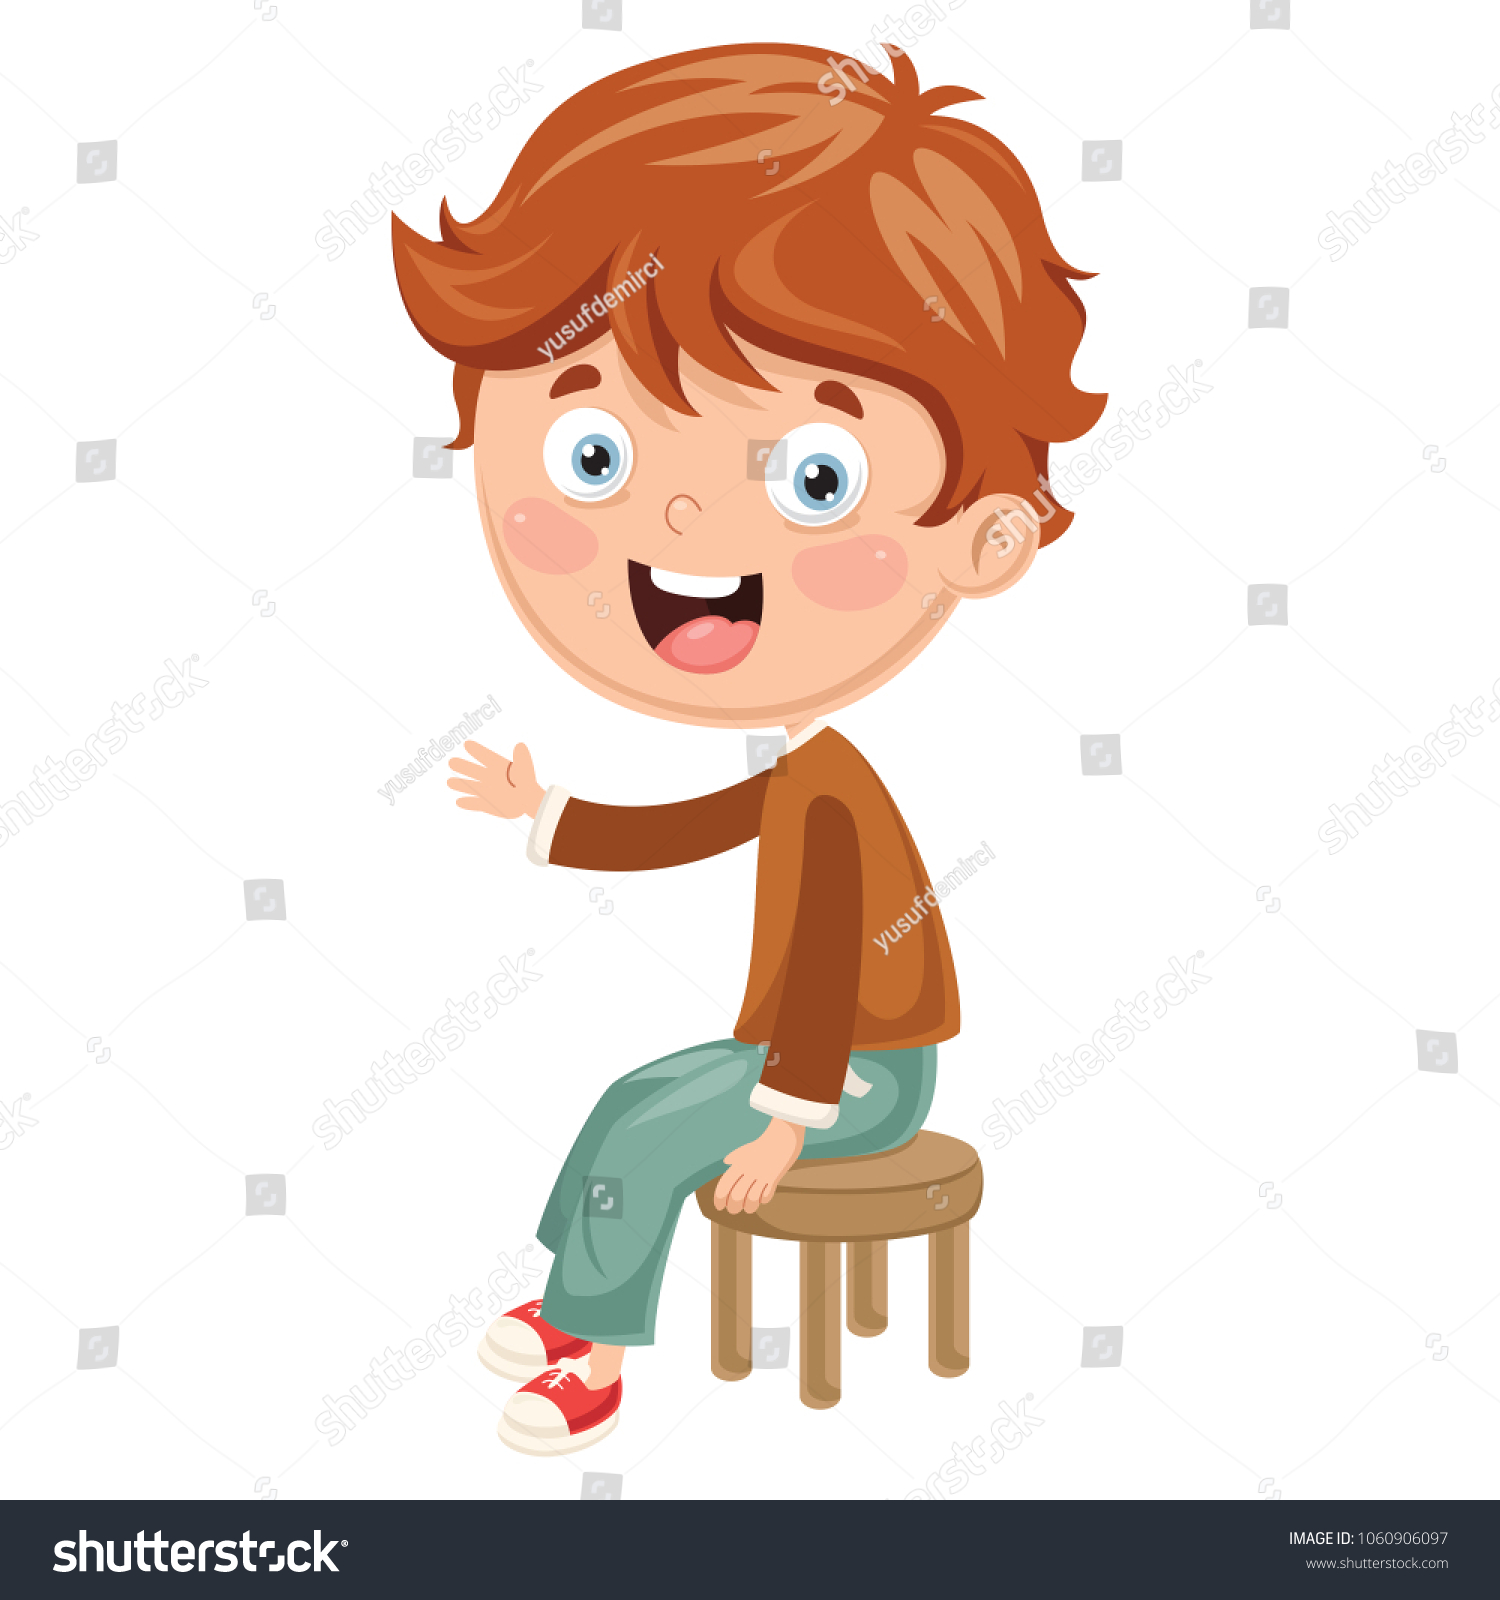 Vector Illustration Kid Sitting On Chair Stock Vector (Royalty Free ...